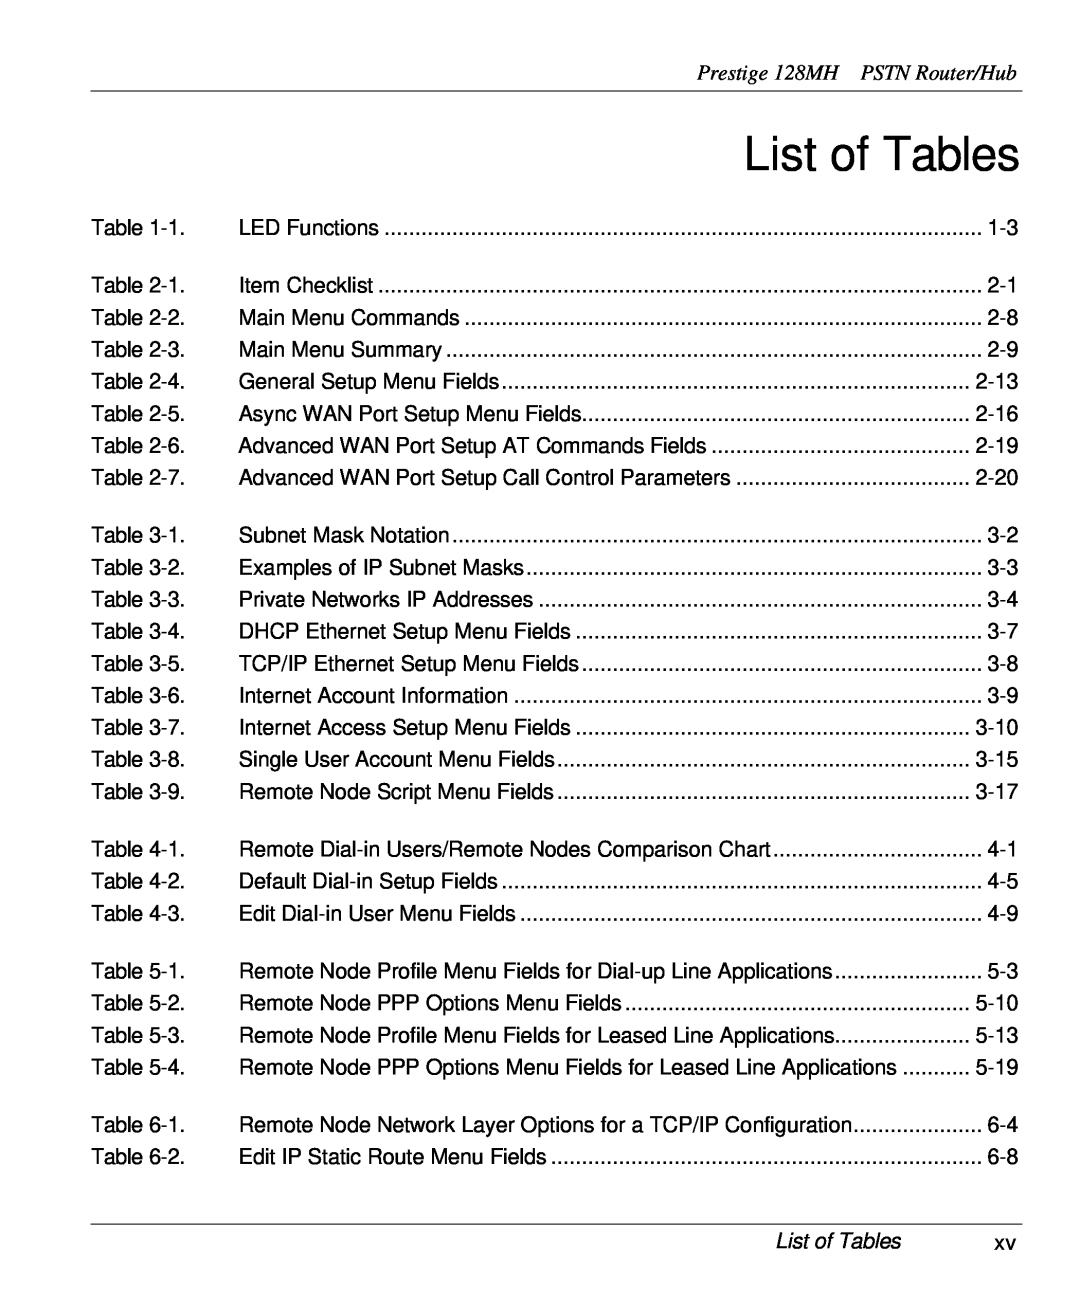 ZyXEL Communications user manual List of Tables, Prestige 128MH PSTN Router/Hub 